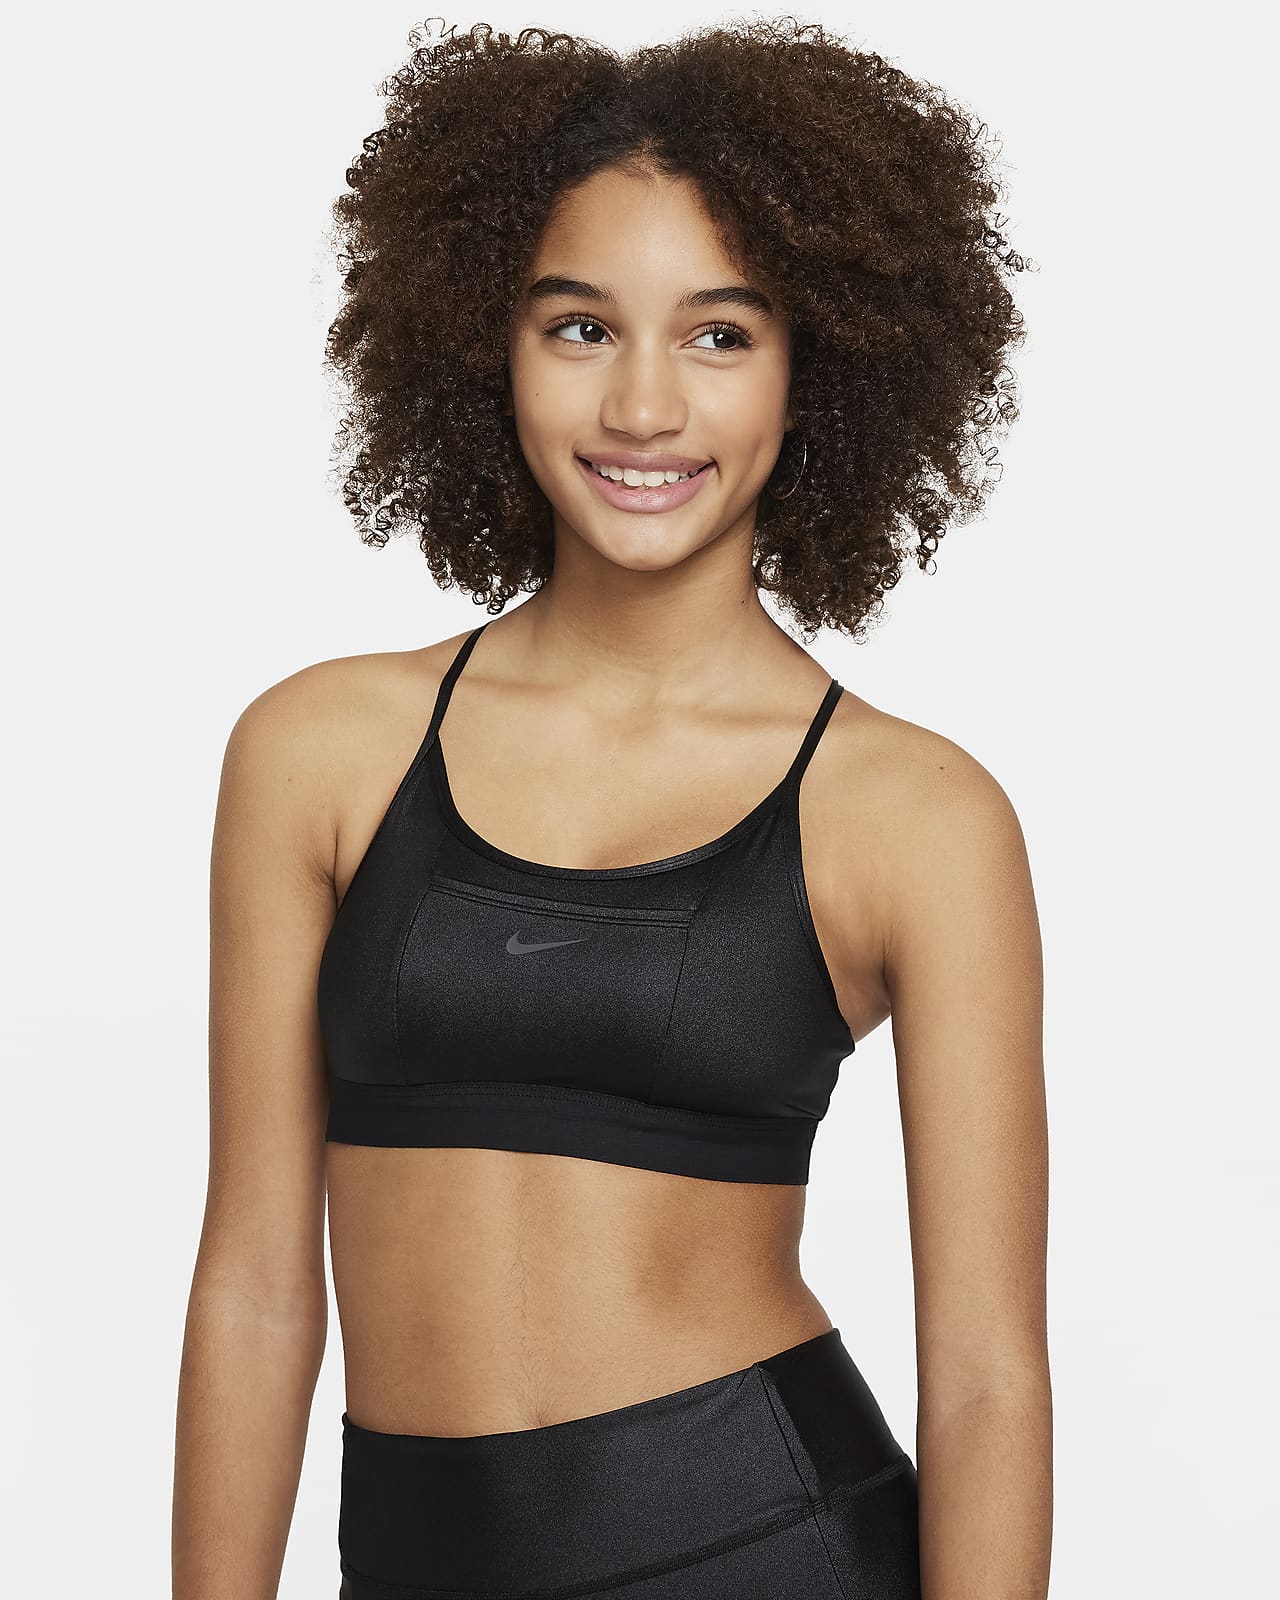 https://static.nike.com/a/images/t_PDP_1280_v1/f_auto,q_auto:eco/f87551c9-ac74-44d1-b952-532df16e43bc/indy-older-sports-bra-0463s6.png